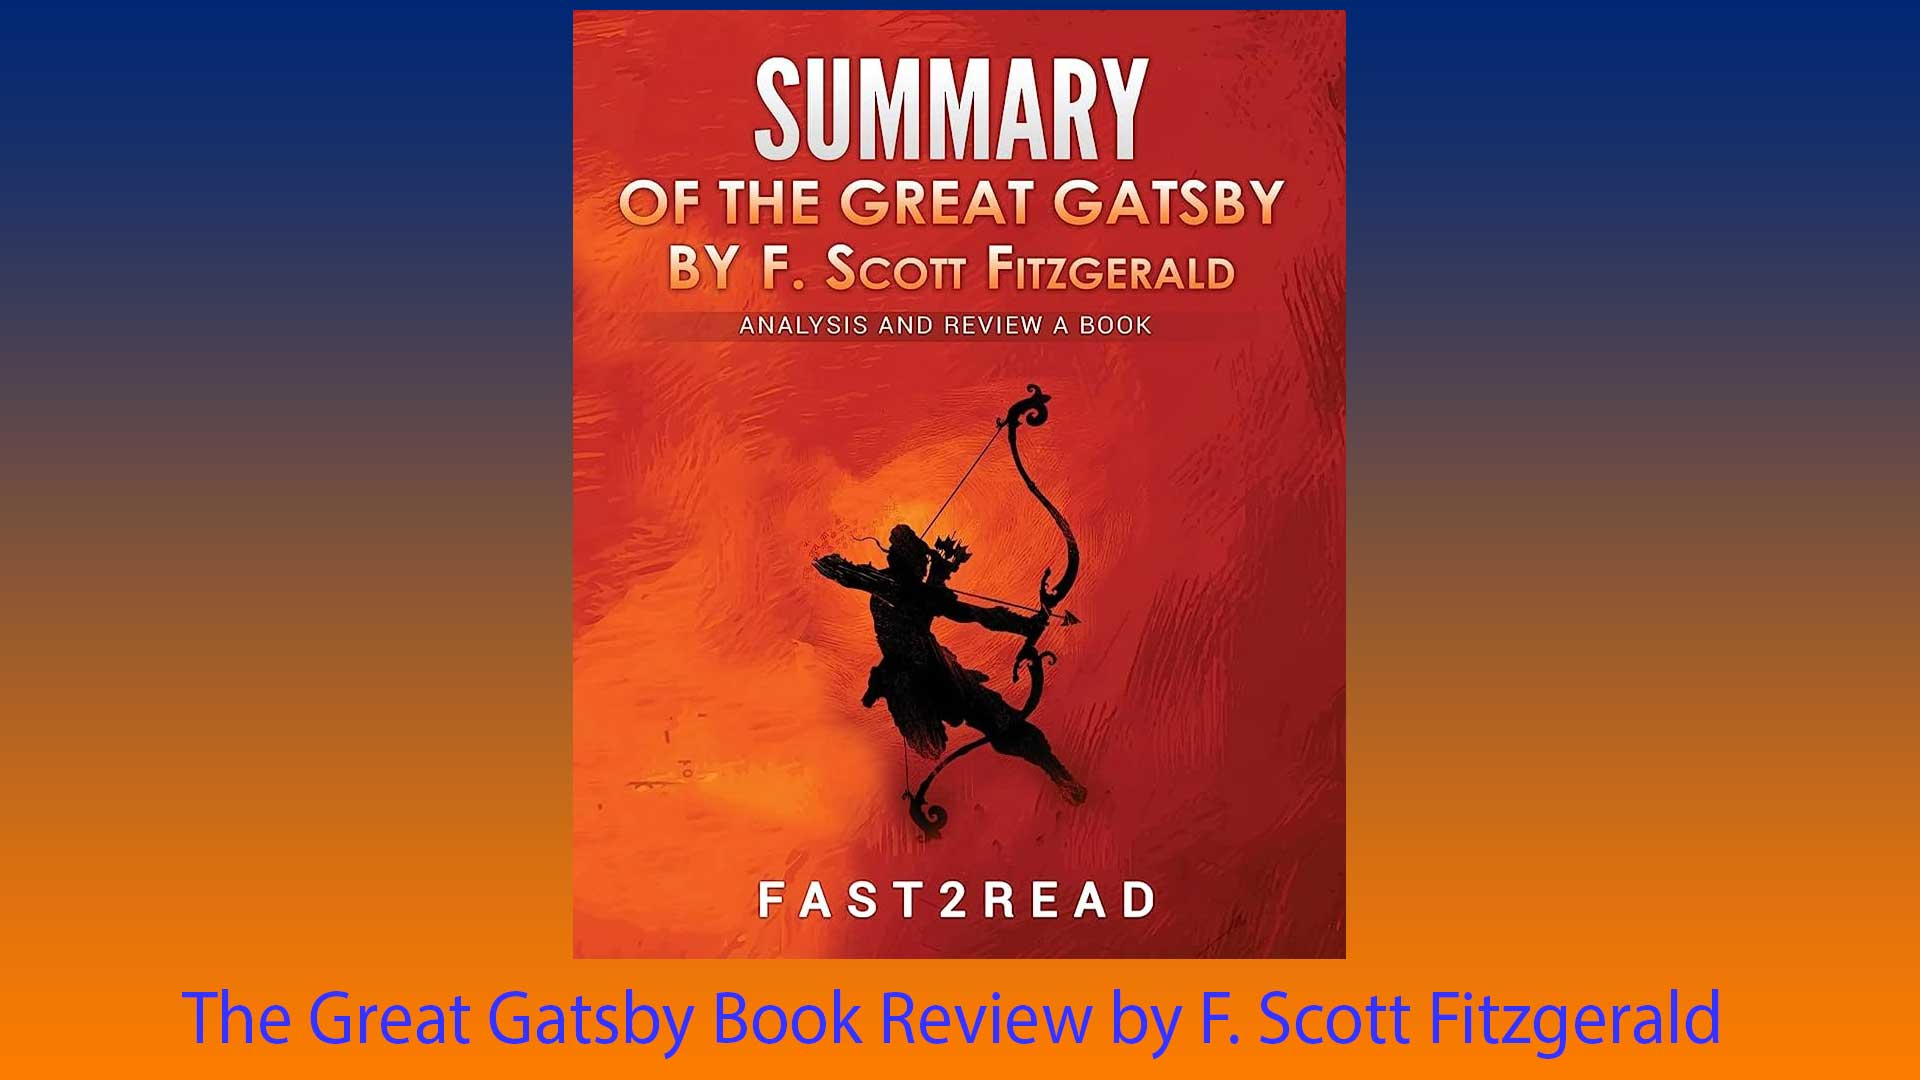 The Great Gatsby Book Review Cover Image